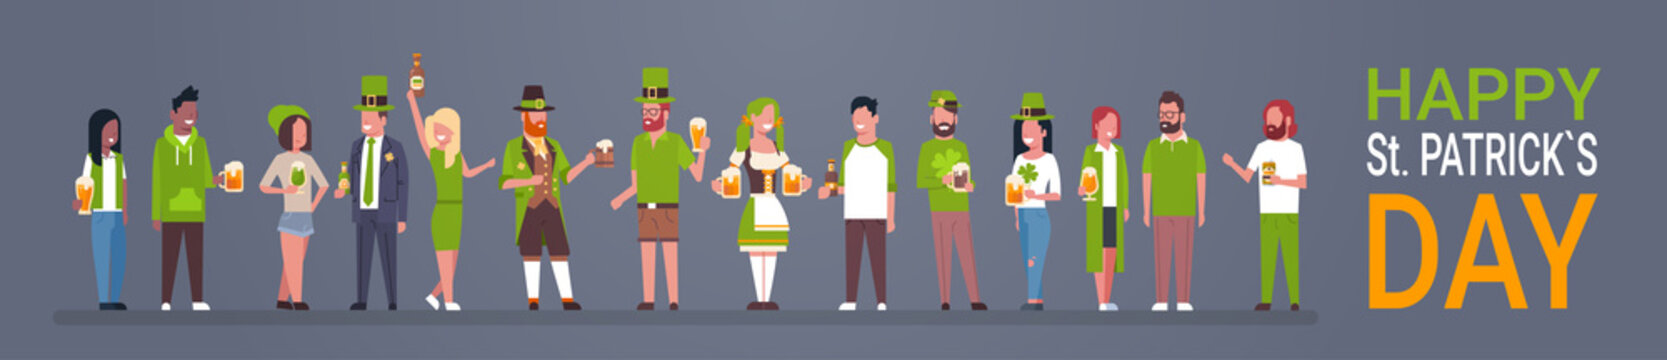 Happy St. Patricks Day Horizontal Poster With People Wearing Traditional Clothes And Holding Beer Glasses And Mugs Flat Vector Illustration